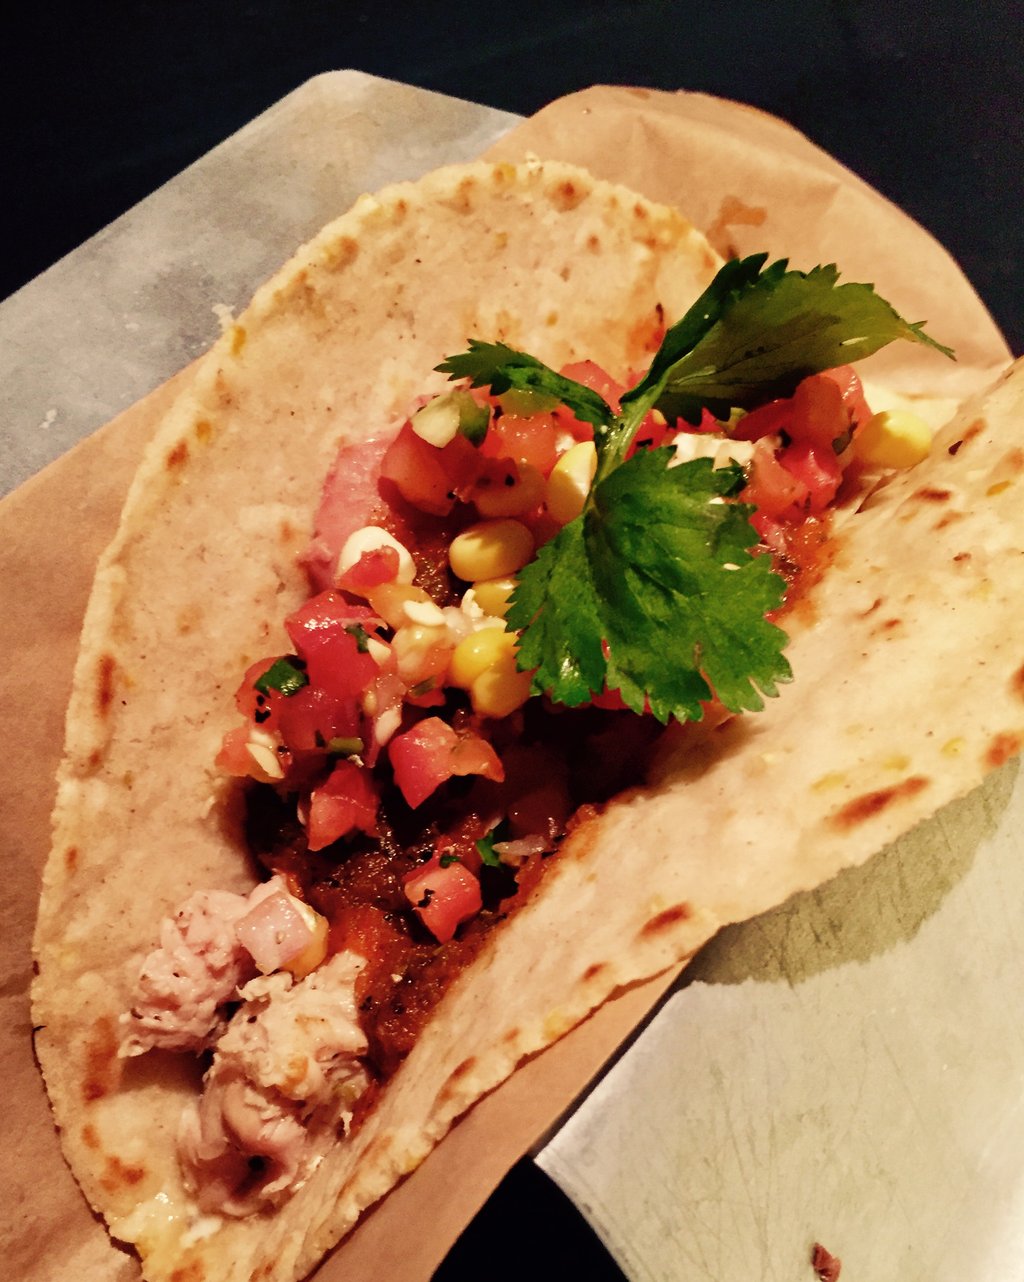 The Top 6 Taco Joints Within 10 Minutes of TCU